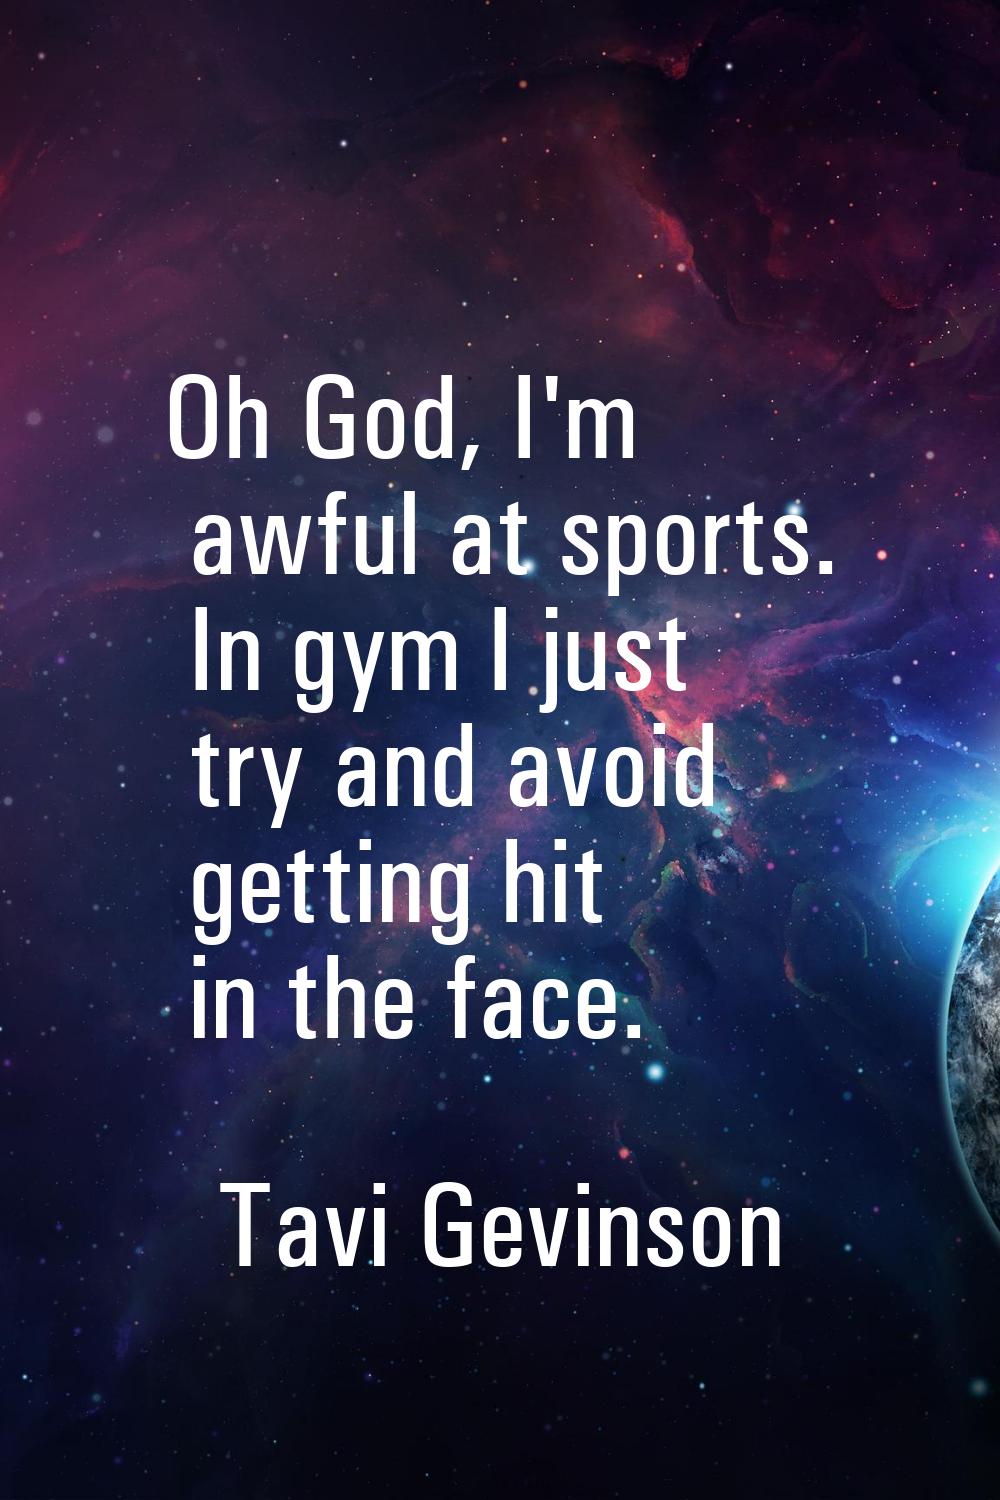 Oh God, I'm awful at sports. In gym I just try and avoid getting hit in the face.